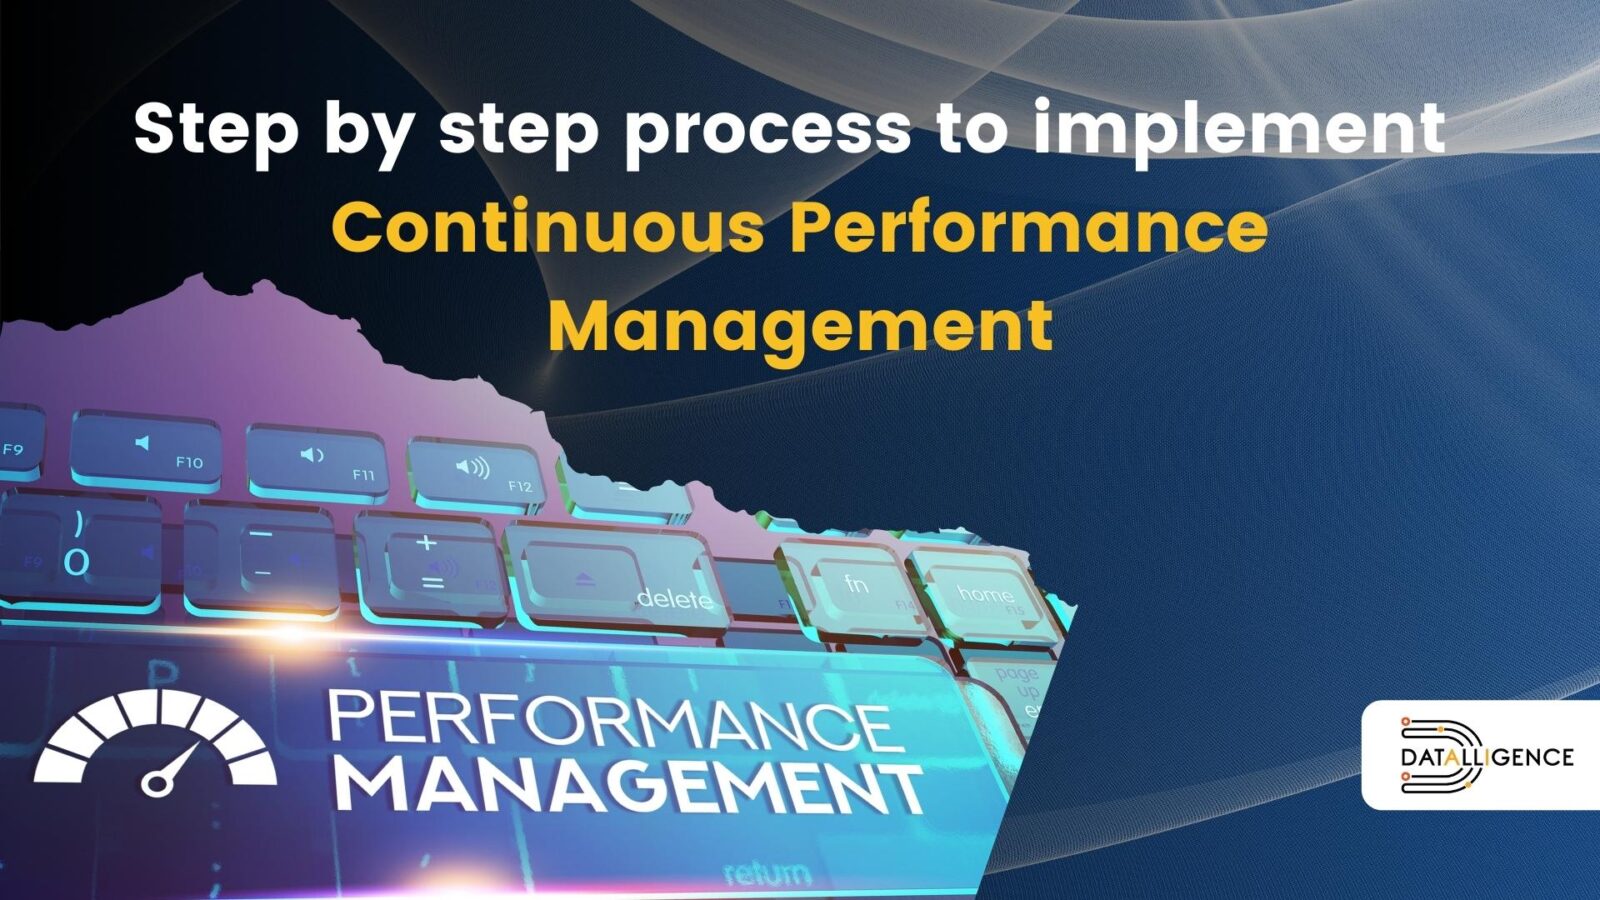 Step by step process to implement Continuous Performance Management